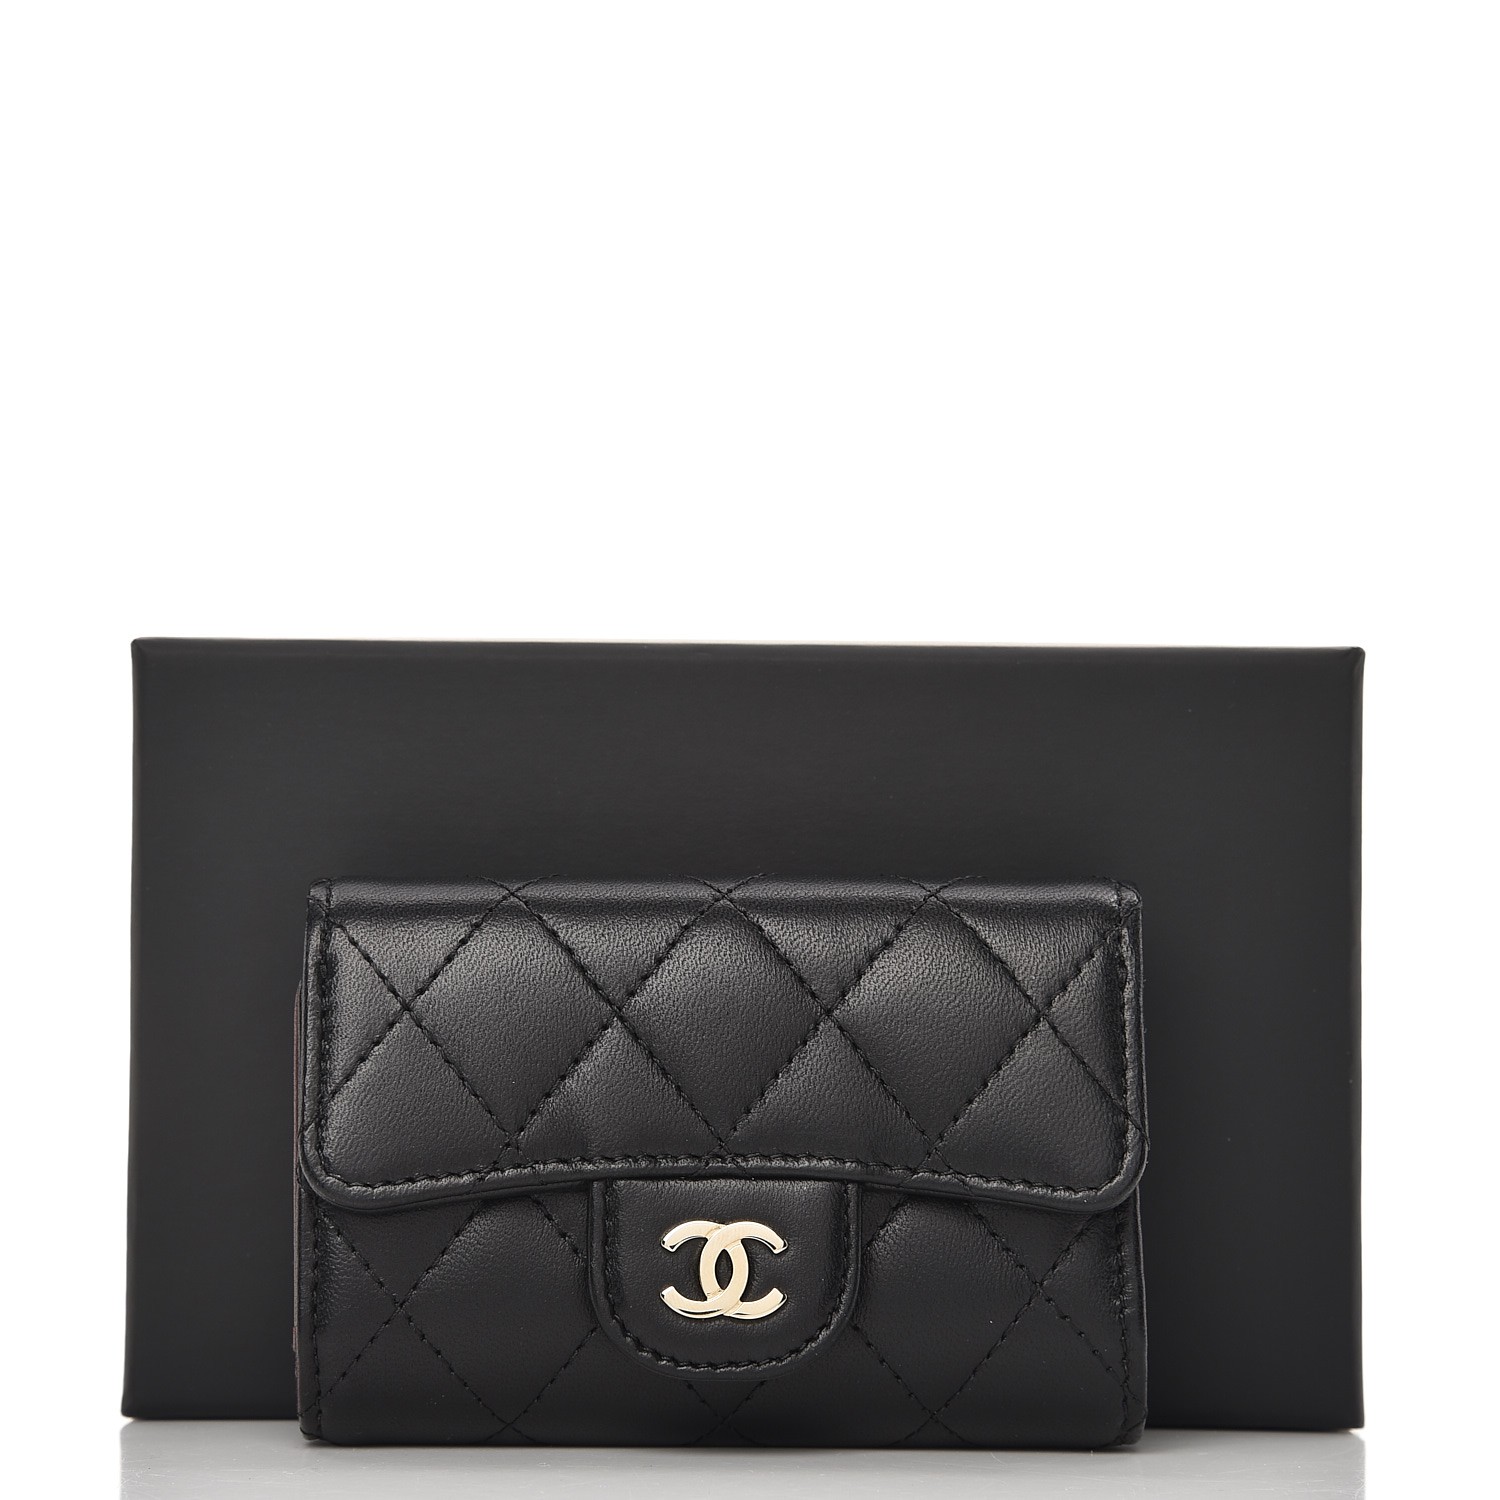 CHANEL Lambskin Quilted 4 Key Holder Black 236189 | FASHIONPHILE